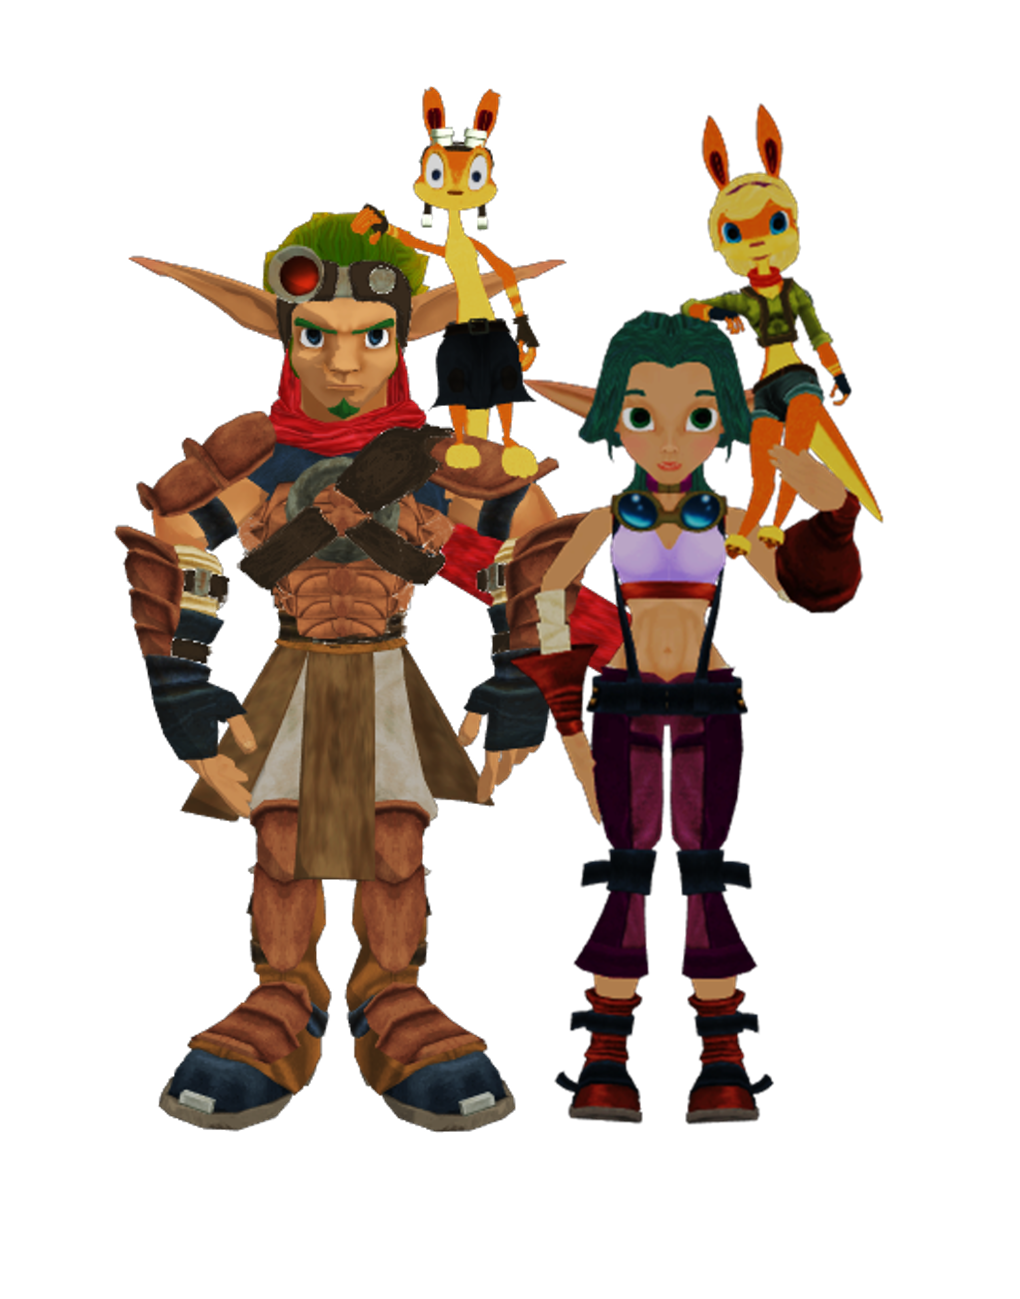 Jak and Daxter Images on Fanpop.